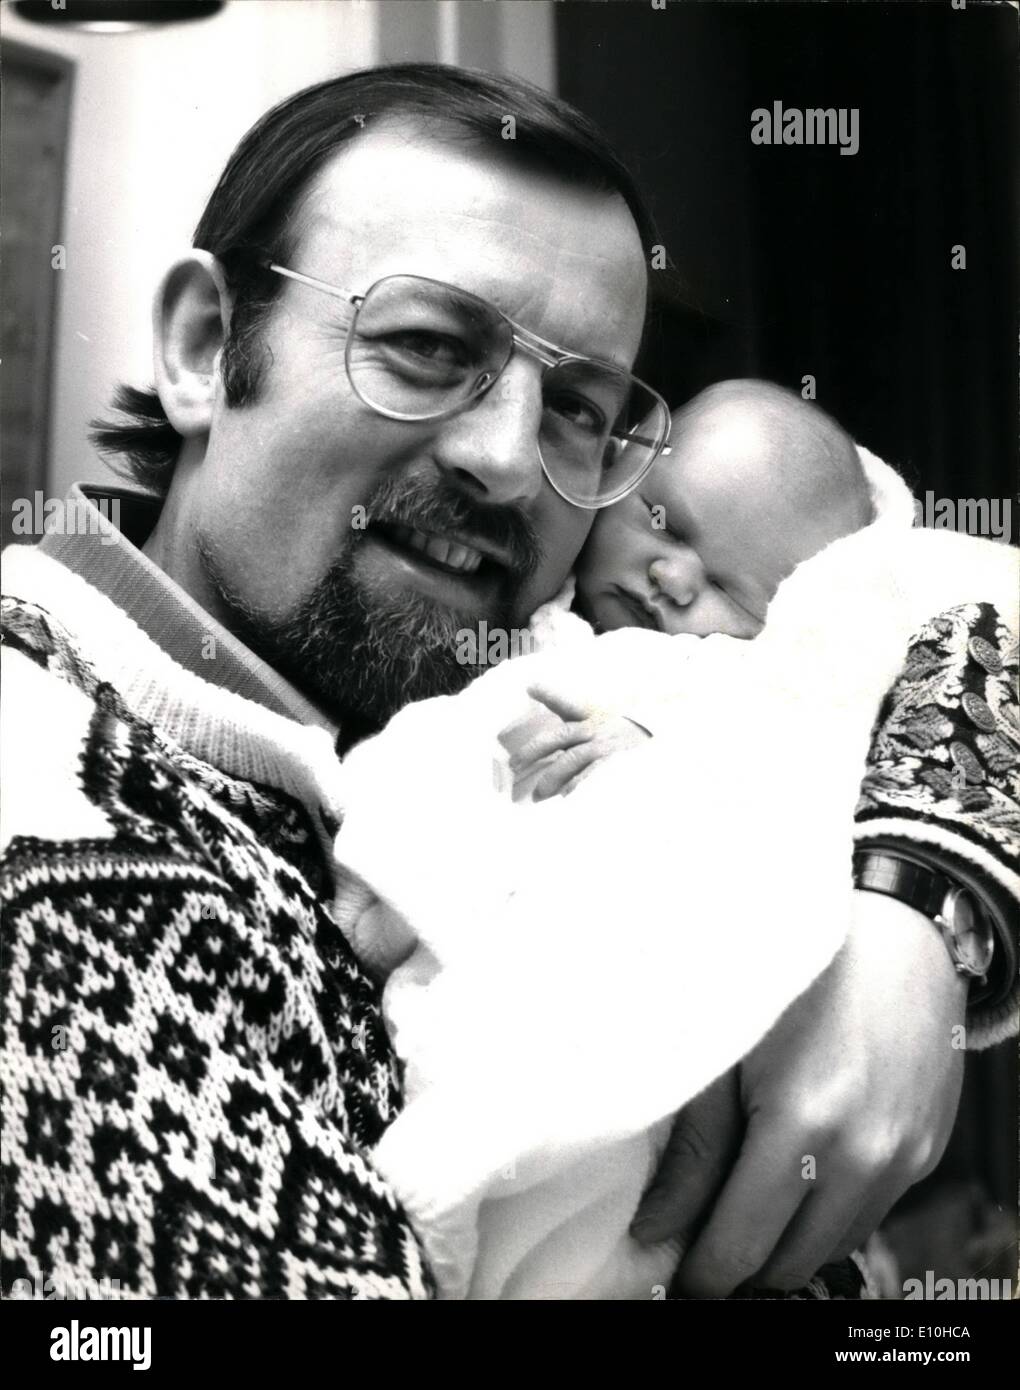 Feb. 02, 1973 - Roger Whittaker Introduces his new daughter, Jessica: Singing star Roger Whittaker, pictured today at the Avenue Clinic, St. John's Wood, with his baby daughter, Jessica, to whom his wife Natalie gave birth on St. Valentine's Day. Stock Photo